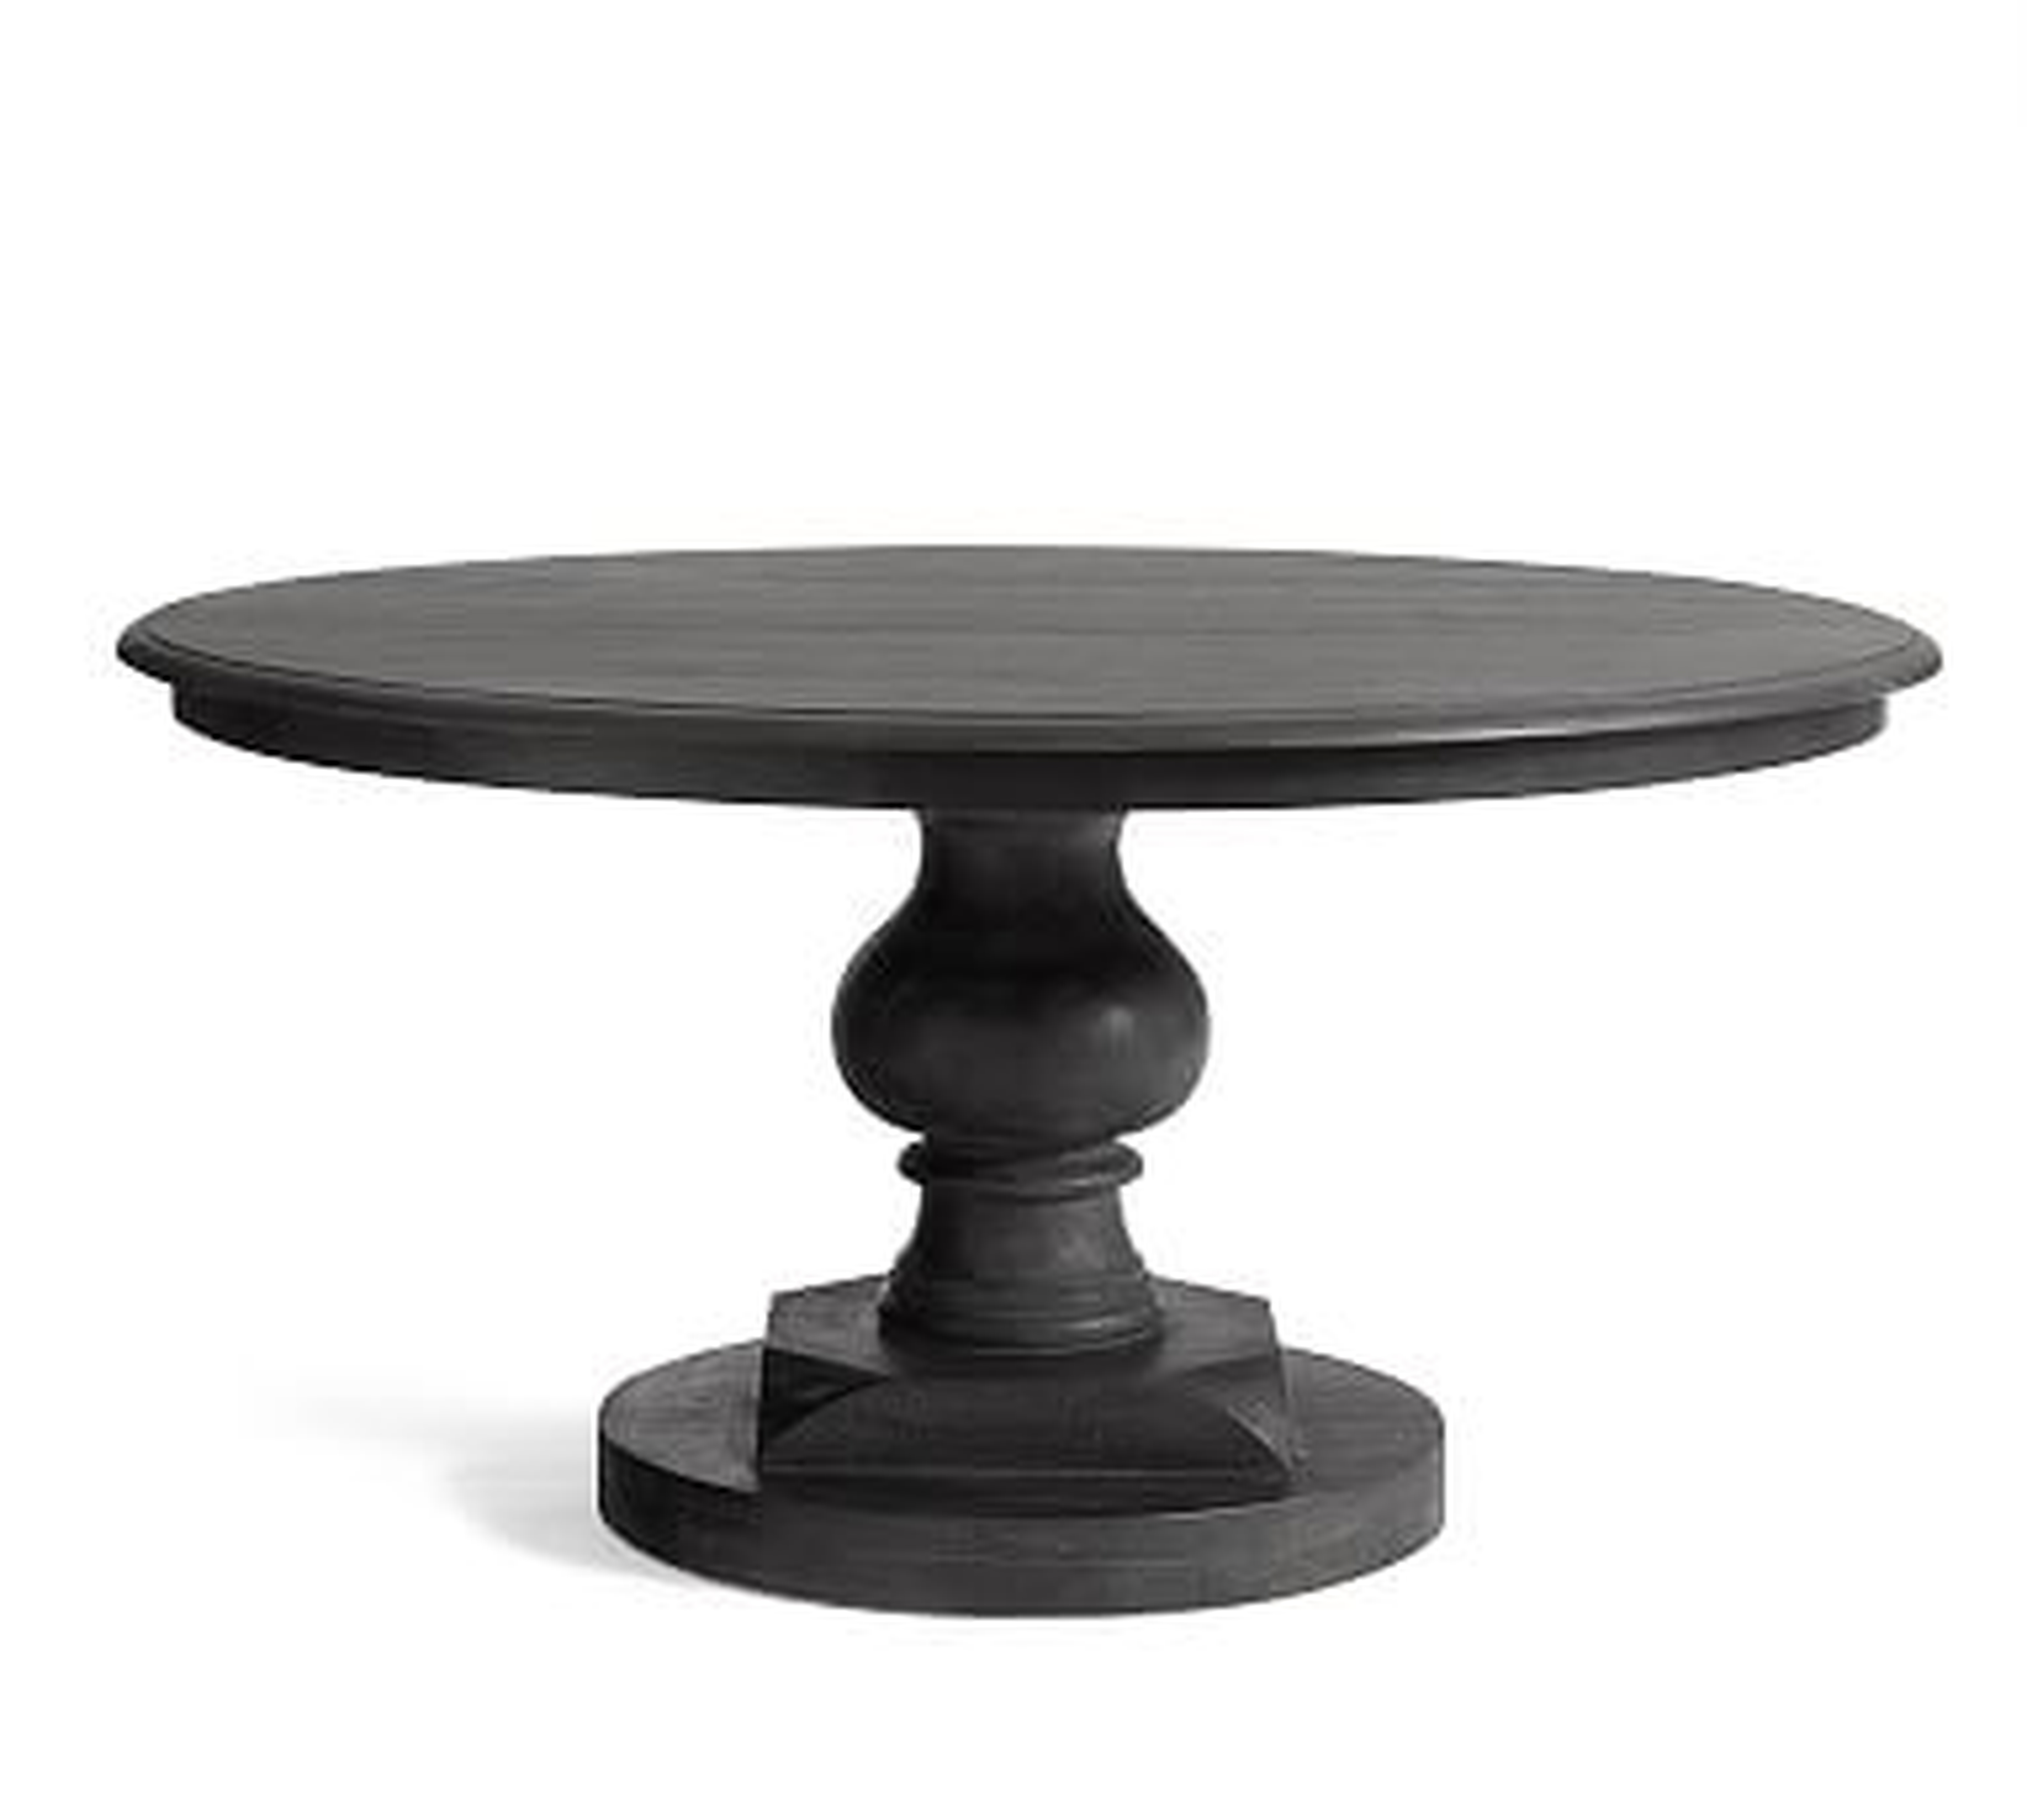 Nolan Round Pedestal Dining Table, Rustic Sable, 60"D - Pottery Barn